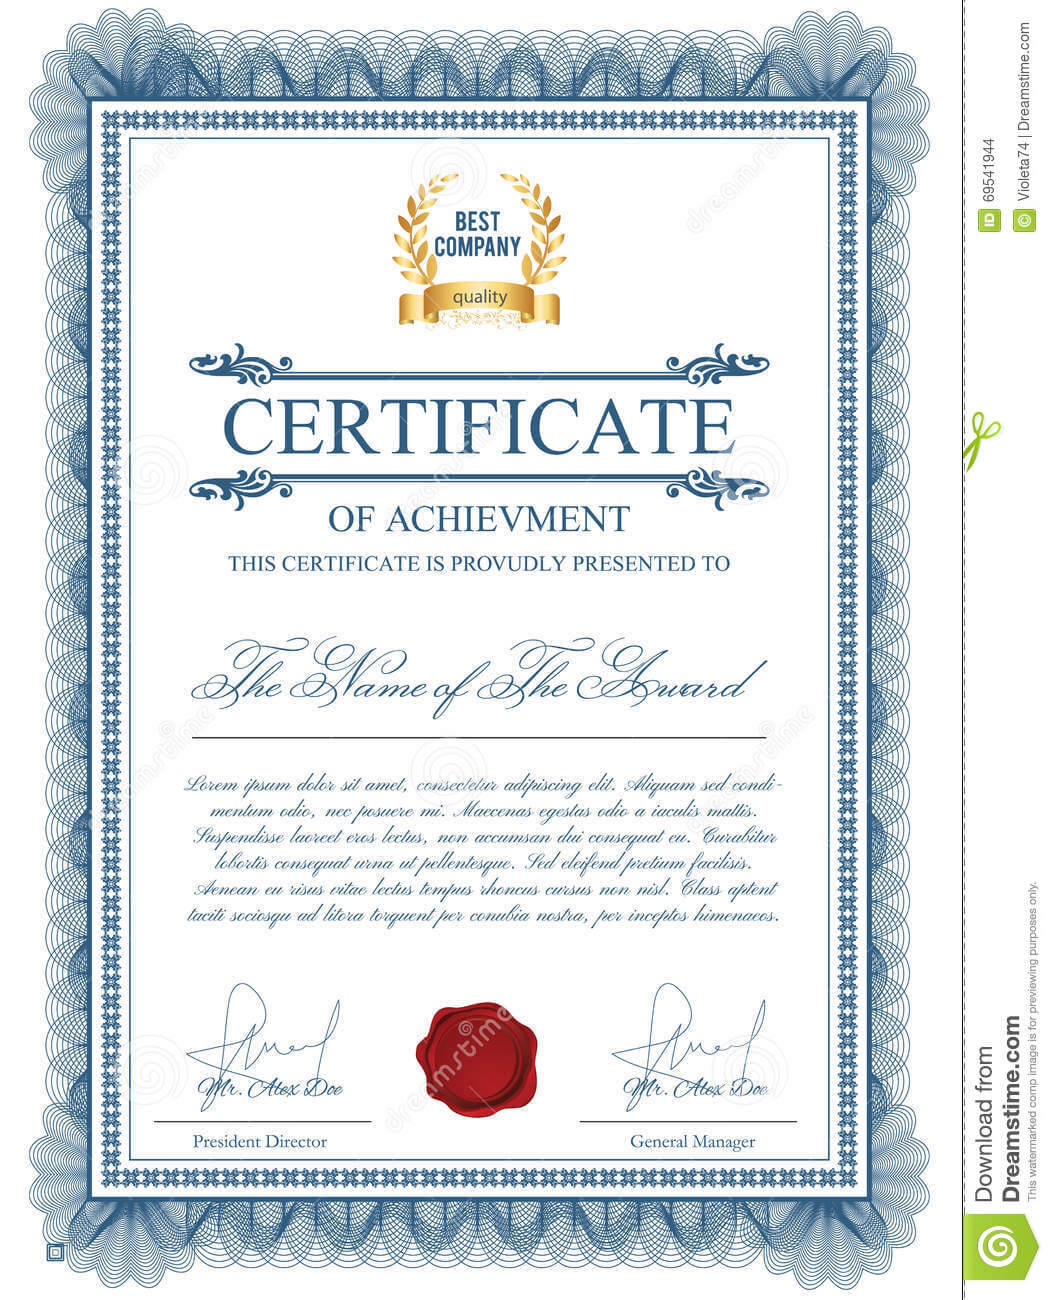 Certificate Template With Guilloche Elements. Stock Vector With Regard To Validation Certificate Template